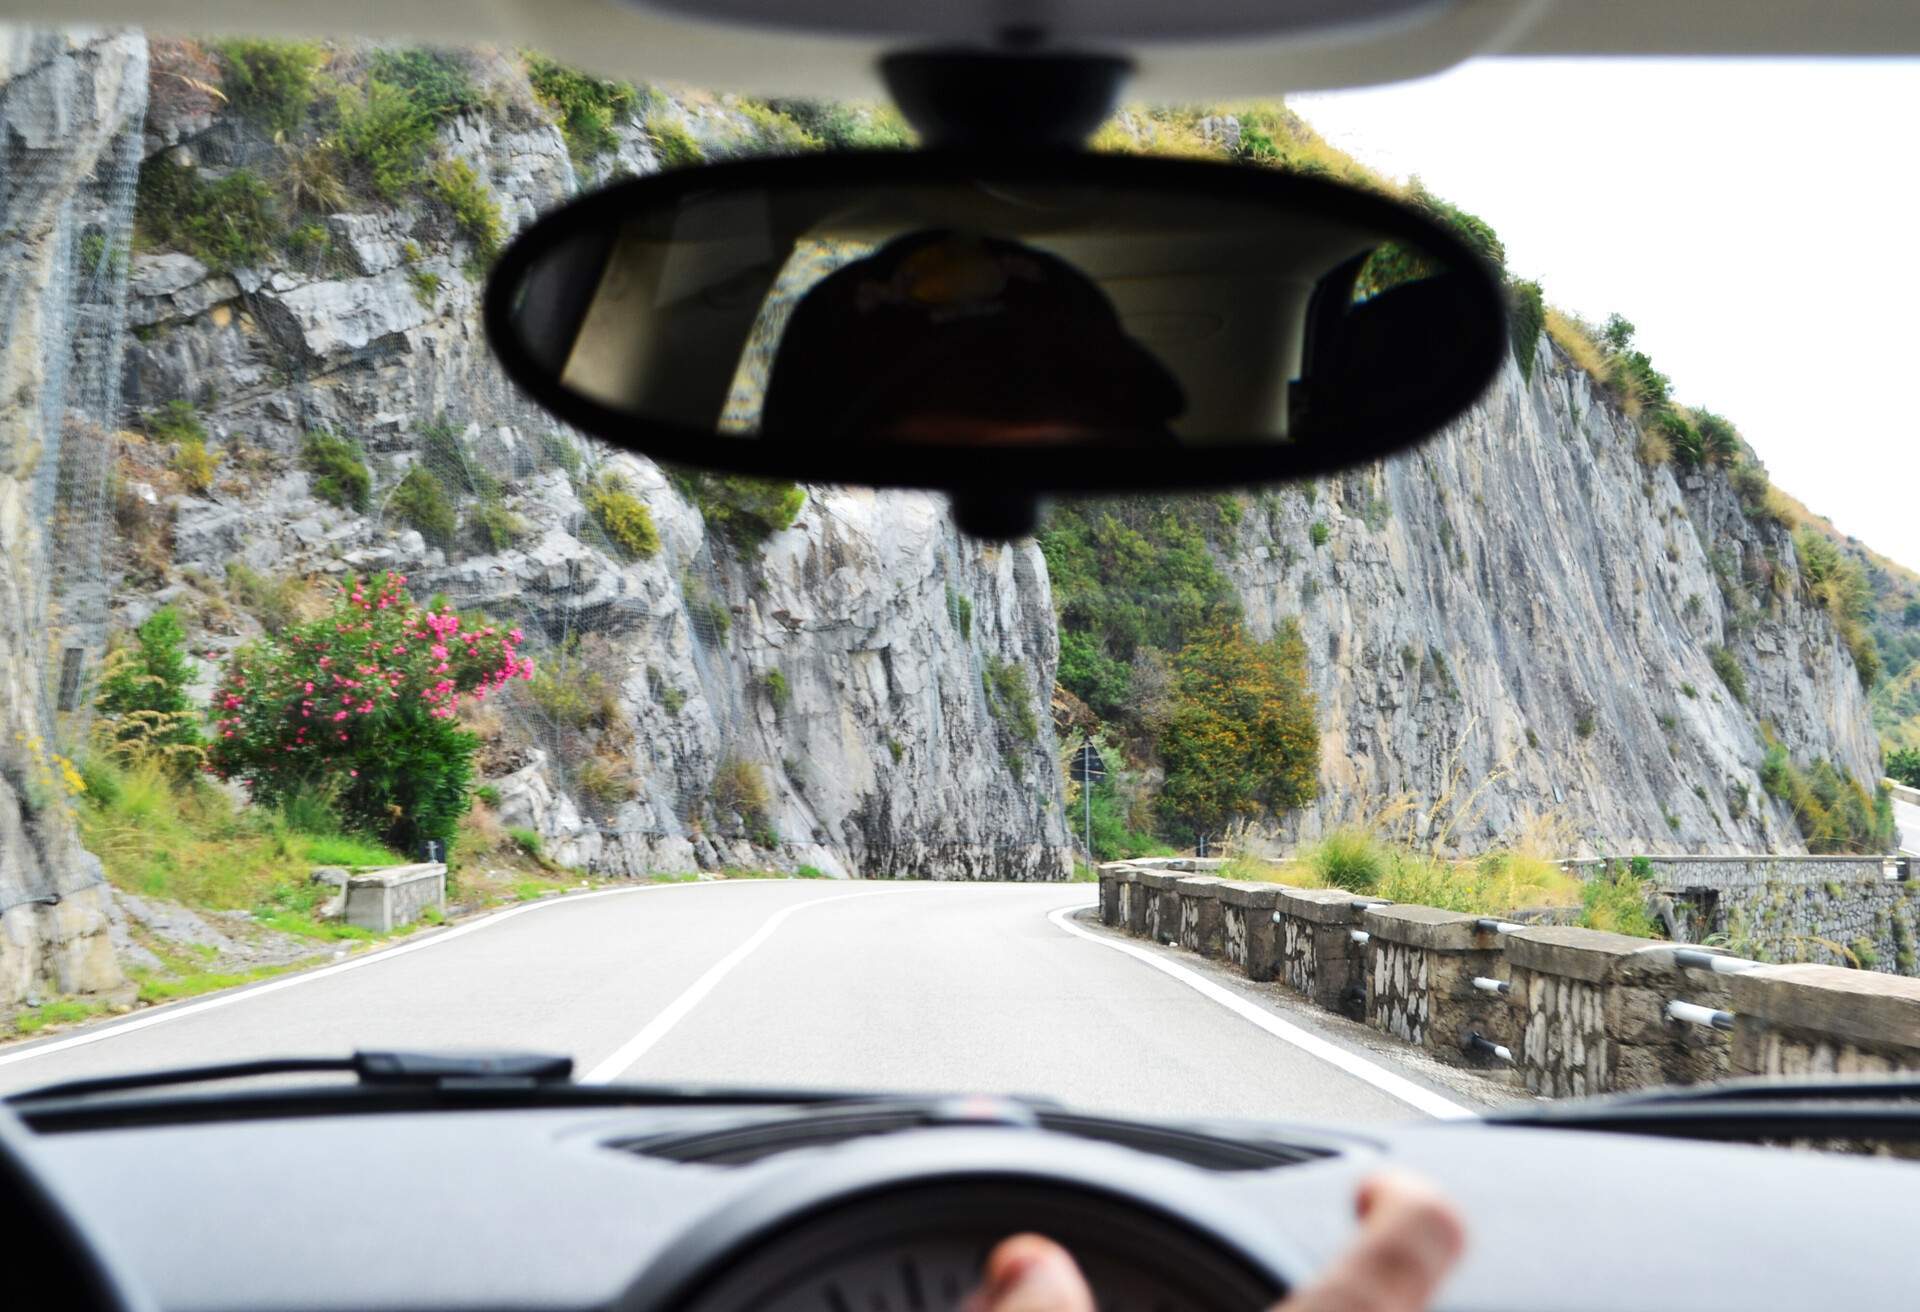 A car's front view of an empty road along a steep cliff.